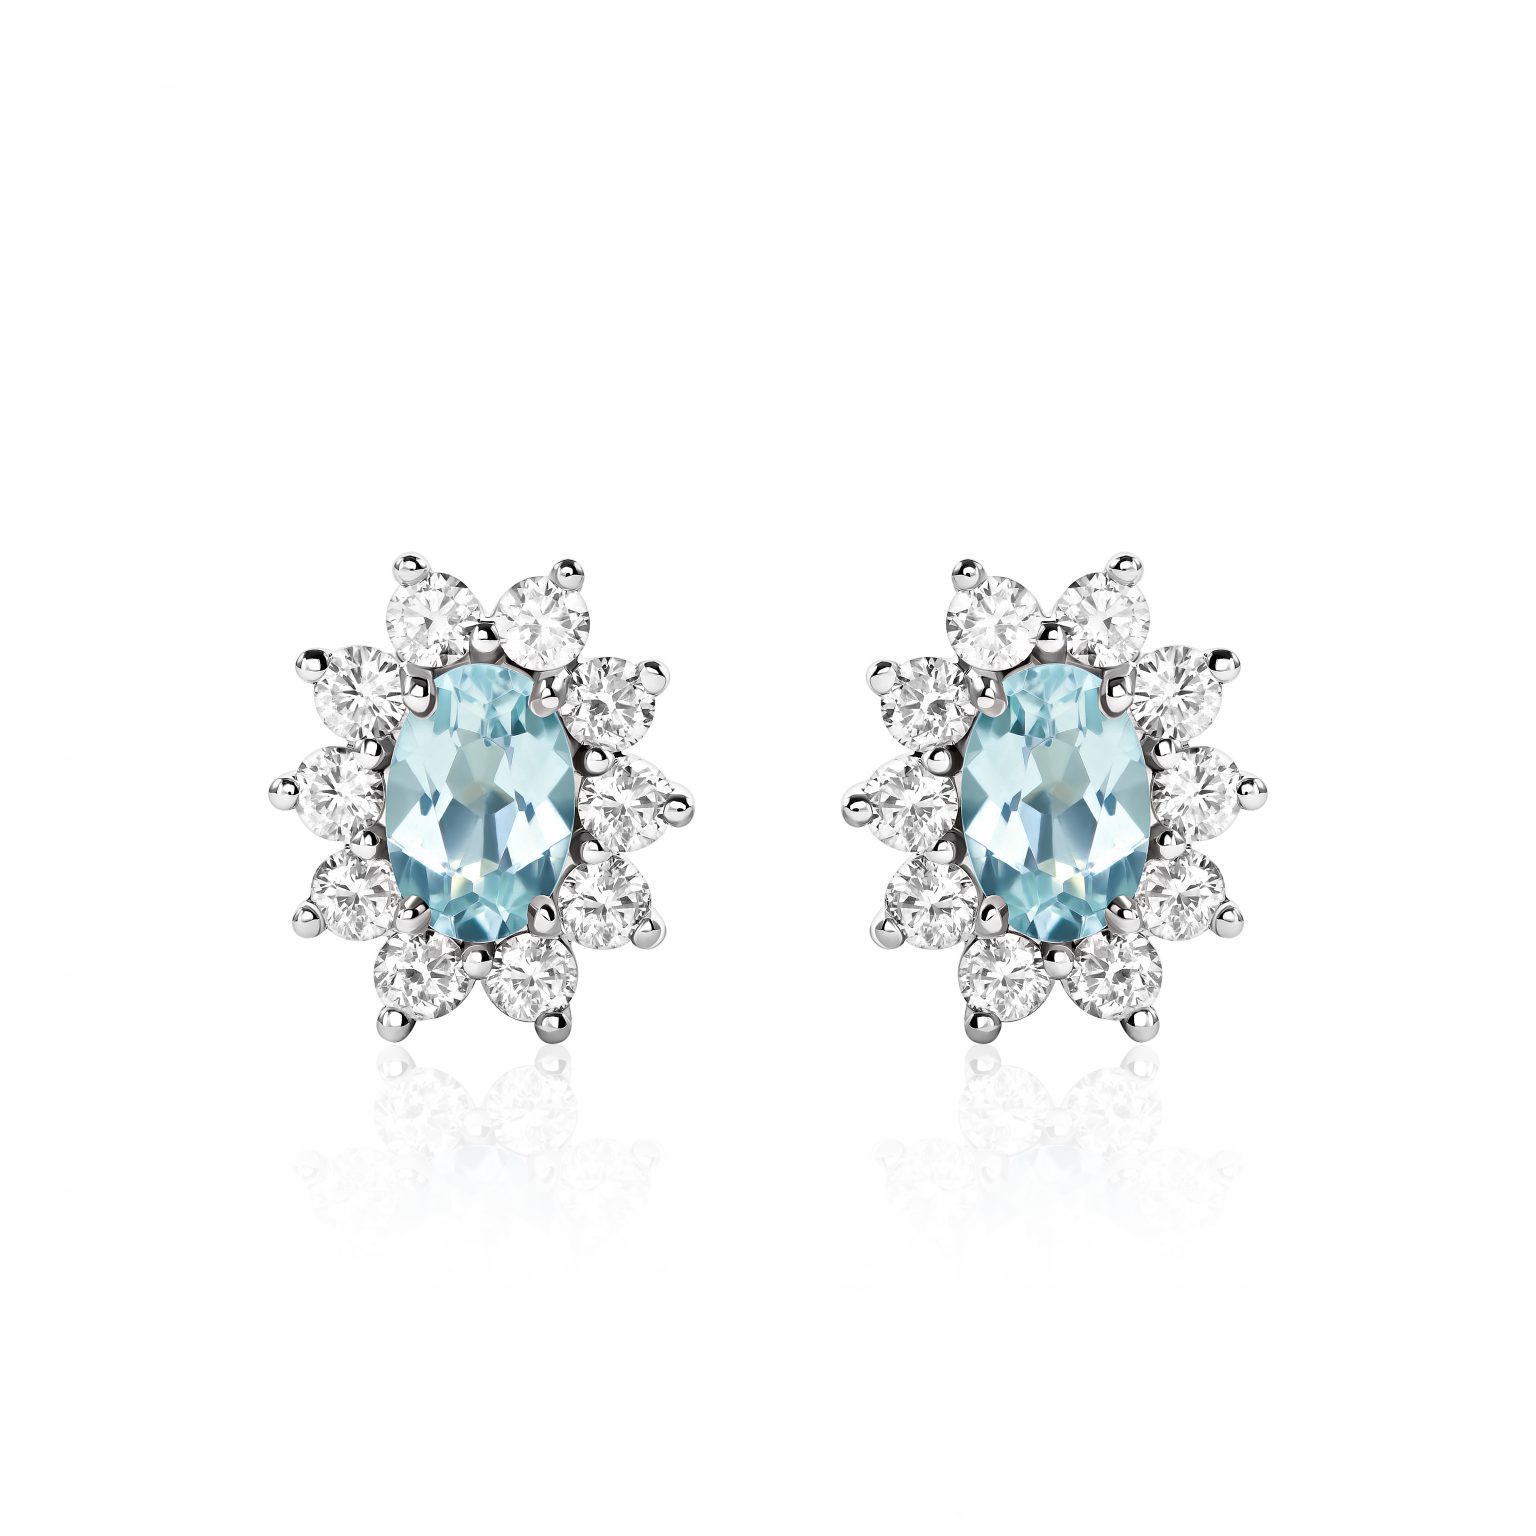 Paraiba tourmaline stud earrings with a total weight of 2.47 ct